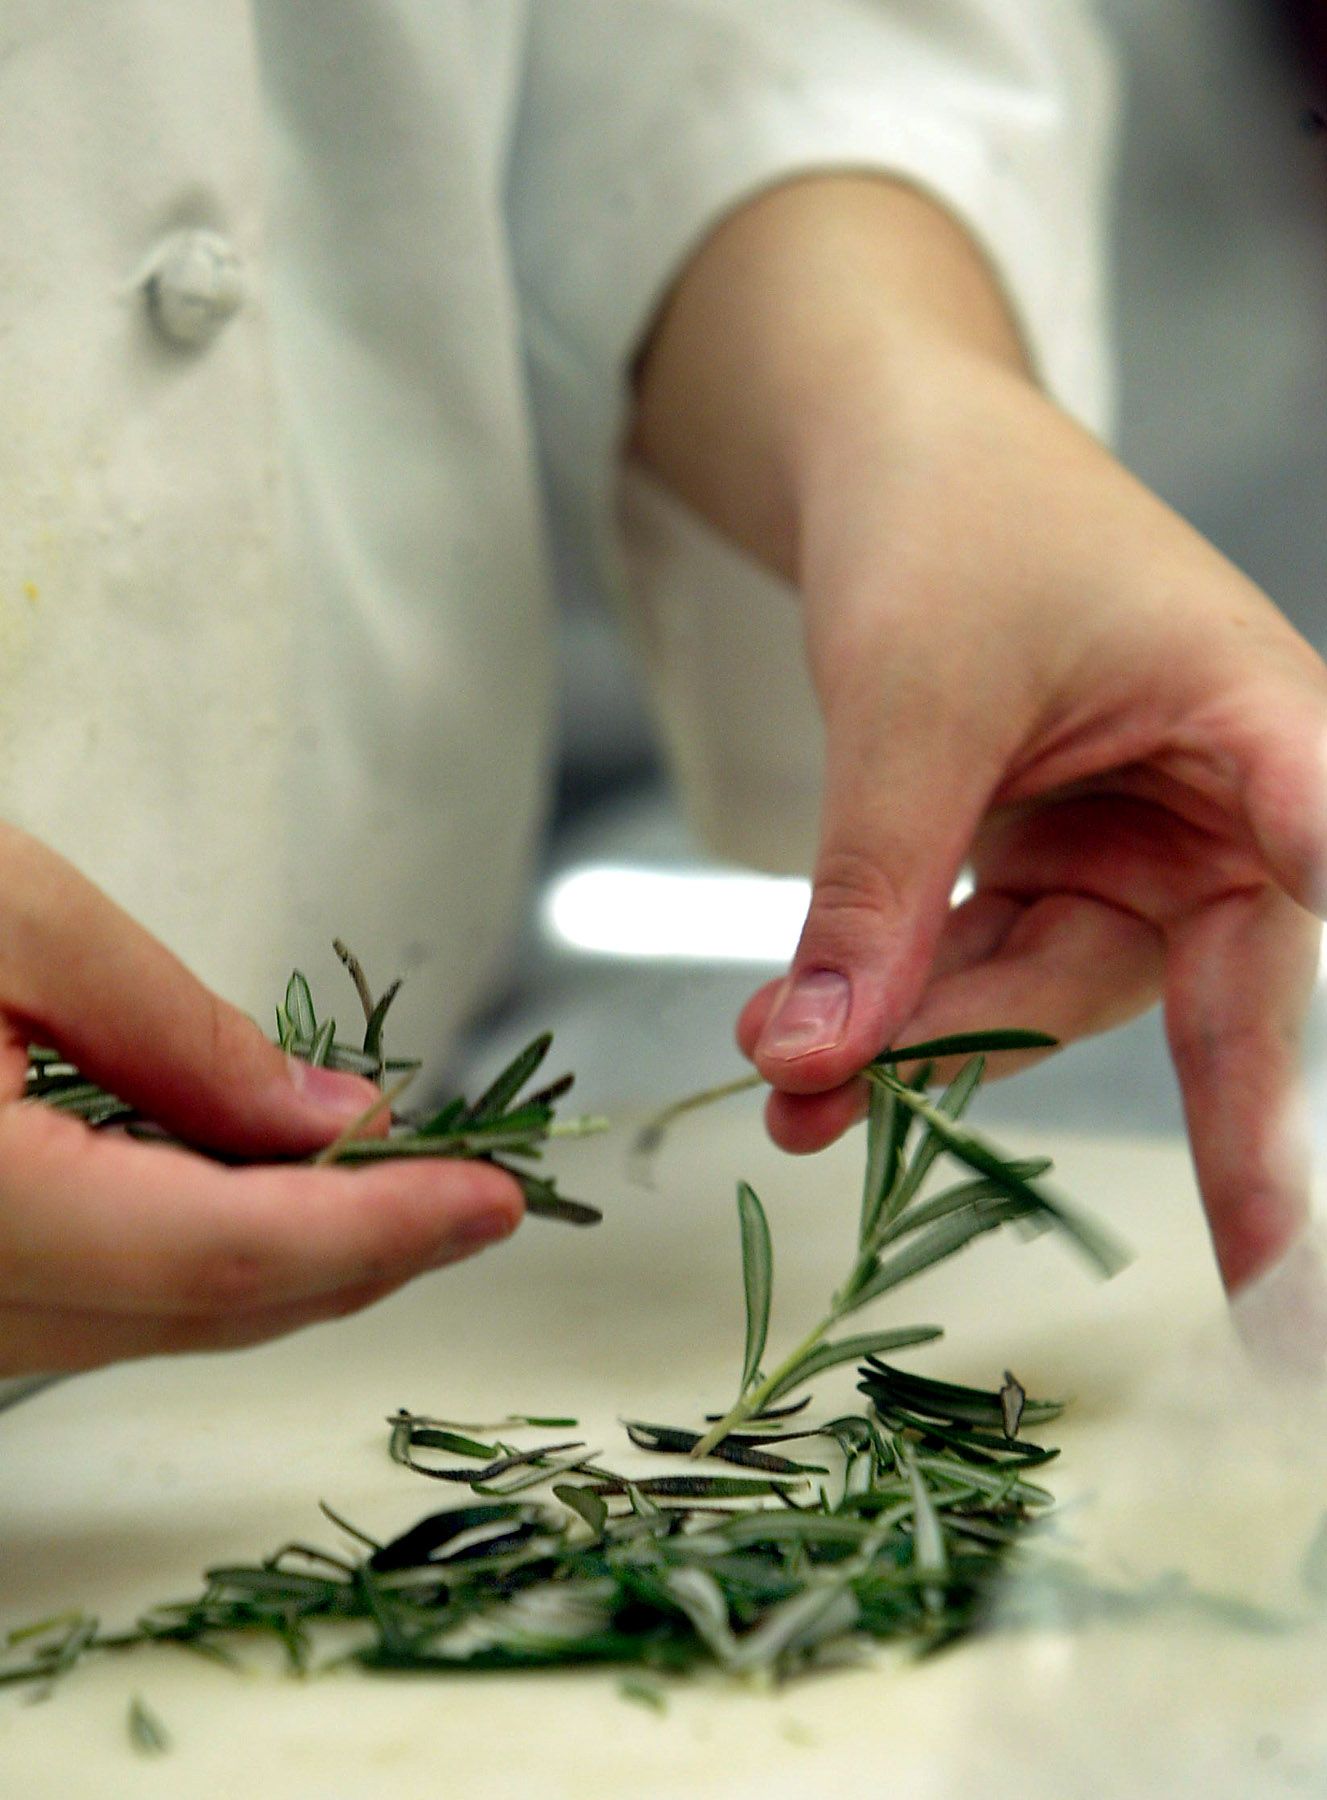 Rosemary: The Herb Of Remembrance